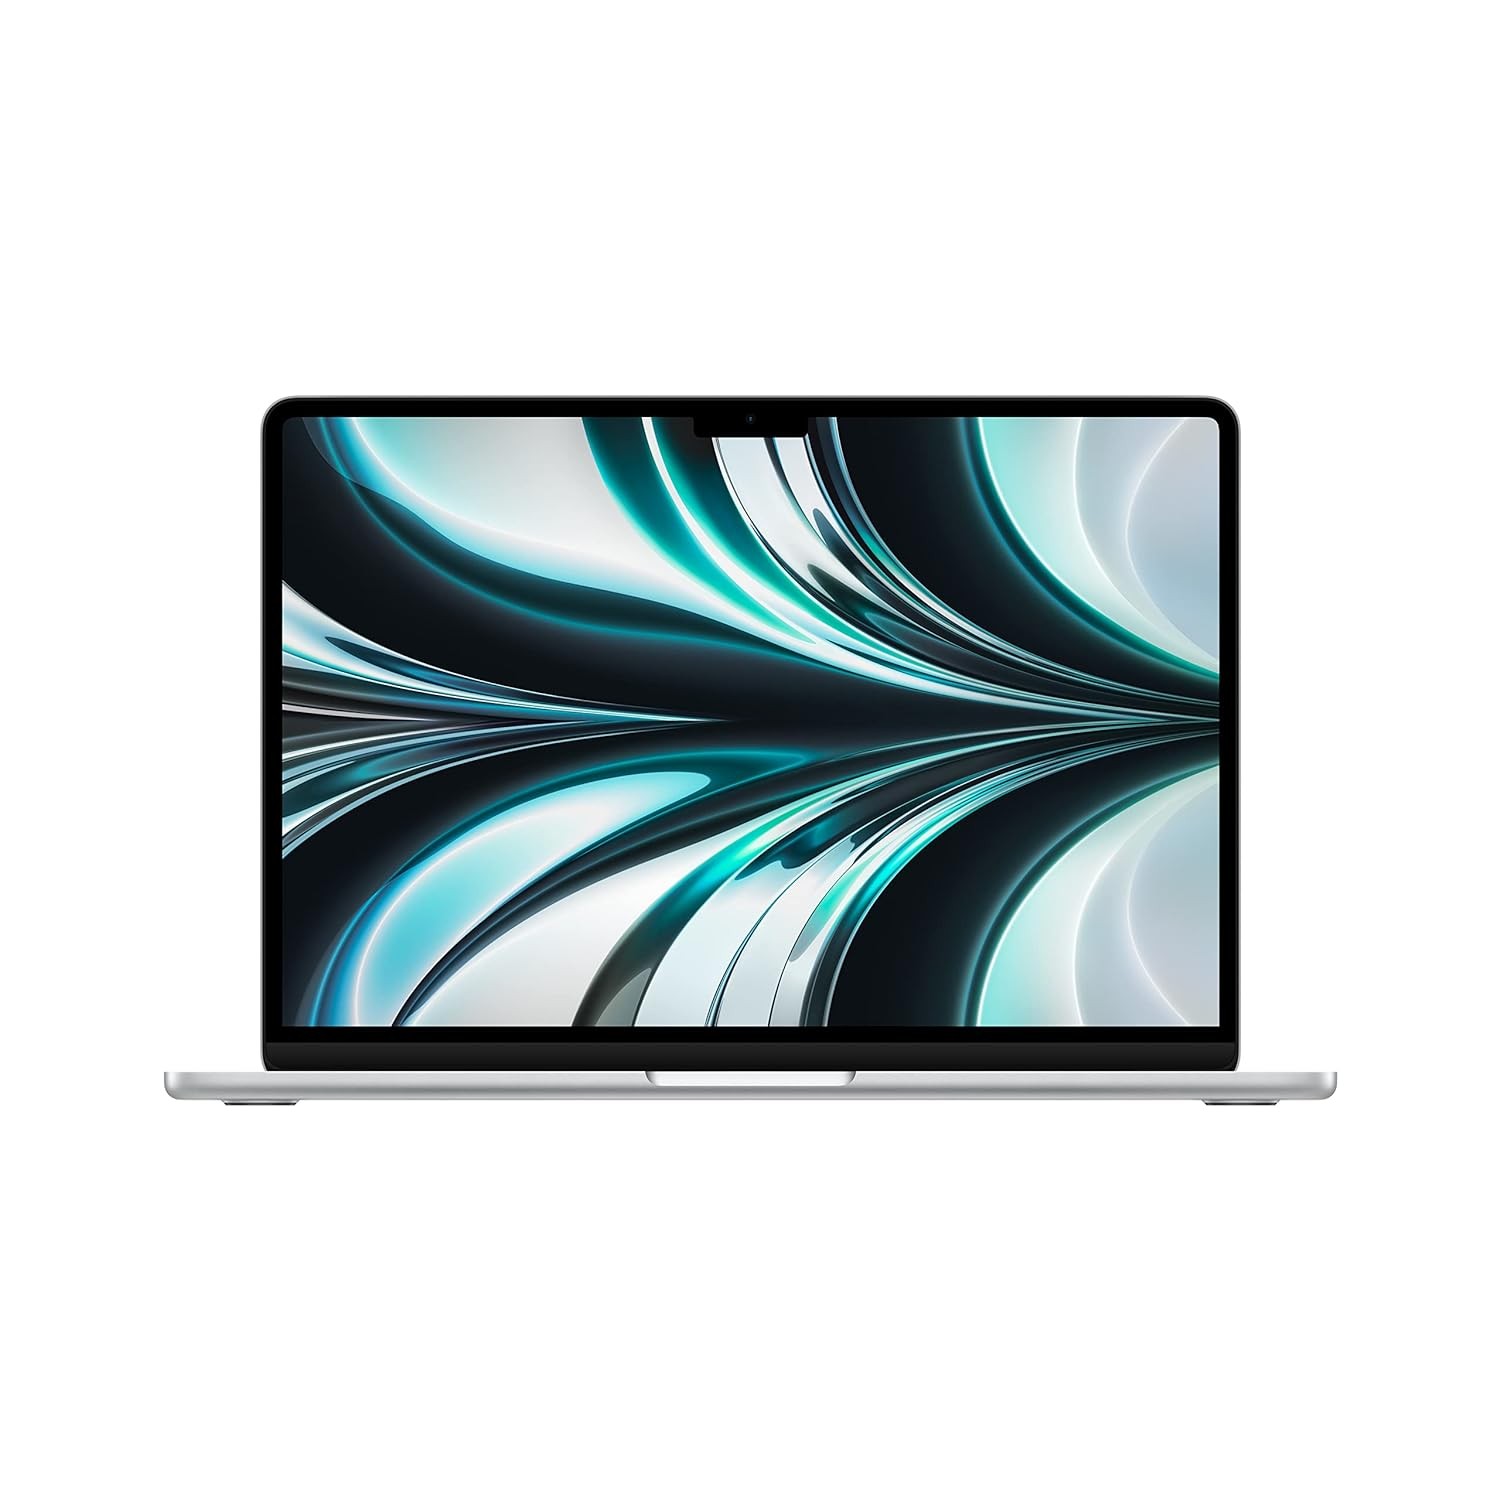 Apple 2022 MacBook Air Laptop with M2 chip: 34.46 cm (13.6-inch) Liquid Retina Display, 8GB RAM, 256GB SSD Storage, Backlit Keyboard, 1080p FaceTime HD Camera. Works with iPhone/iPad; Silver